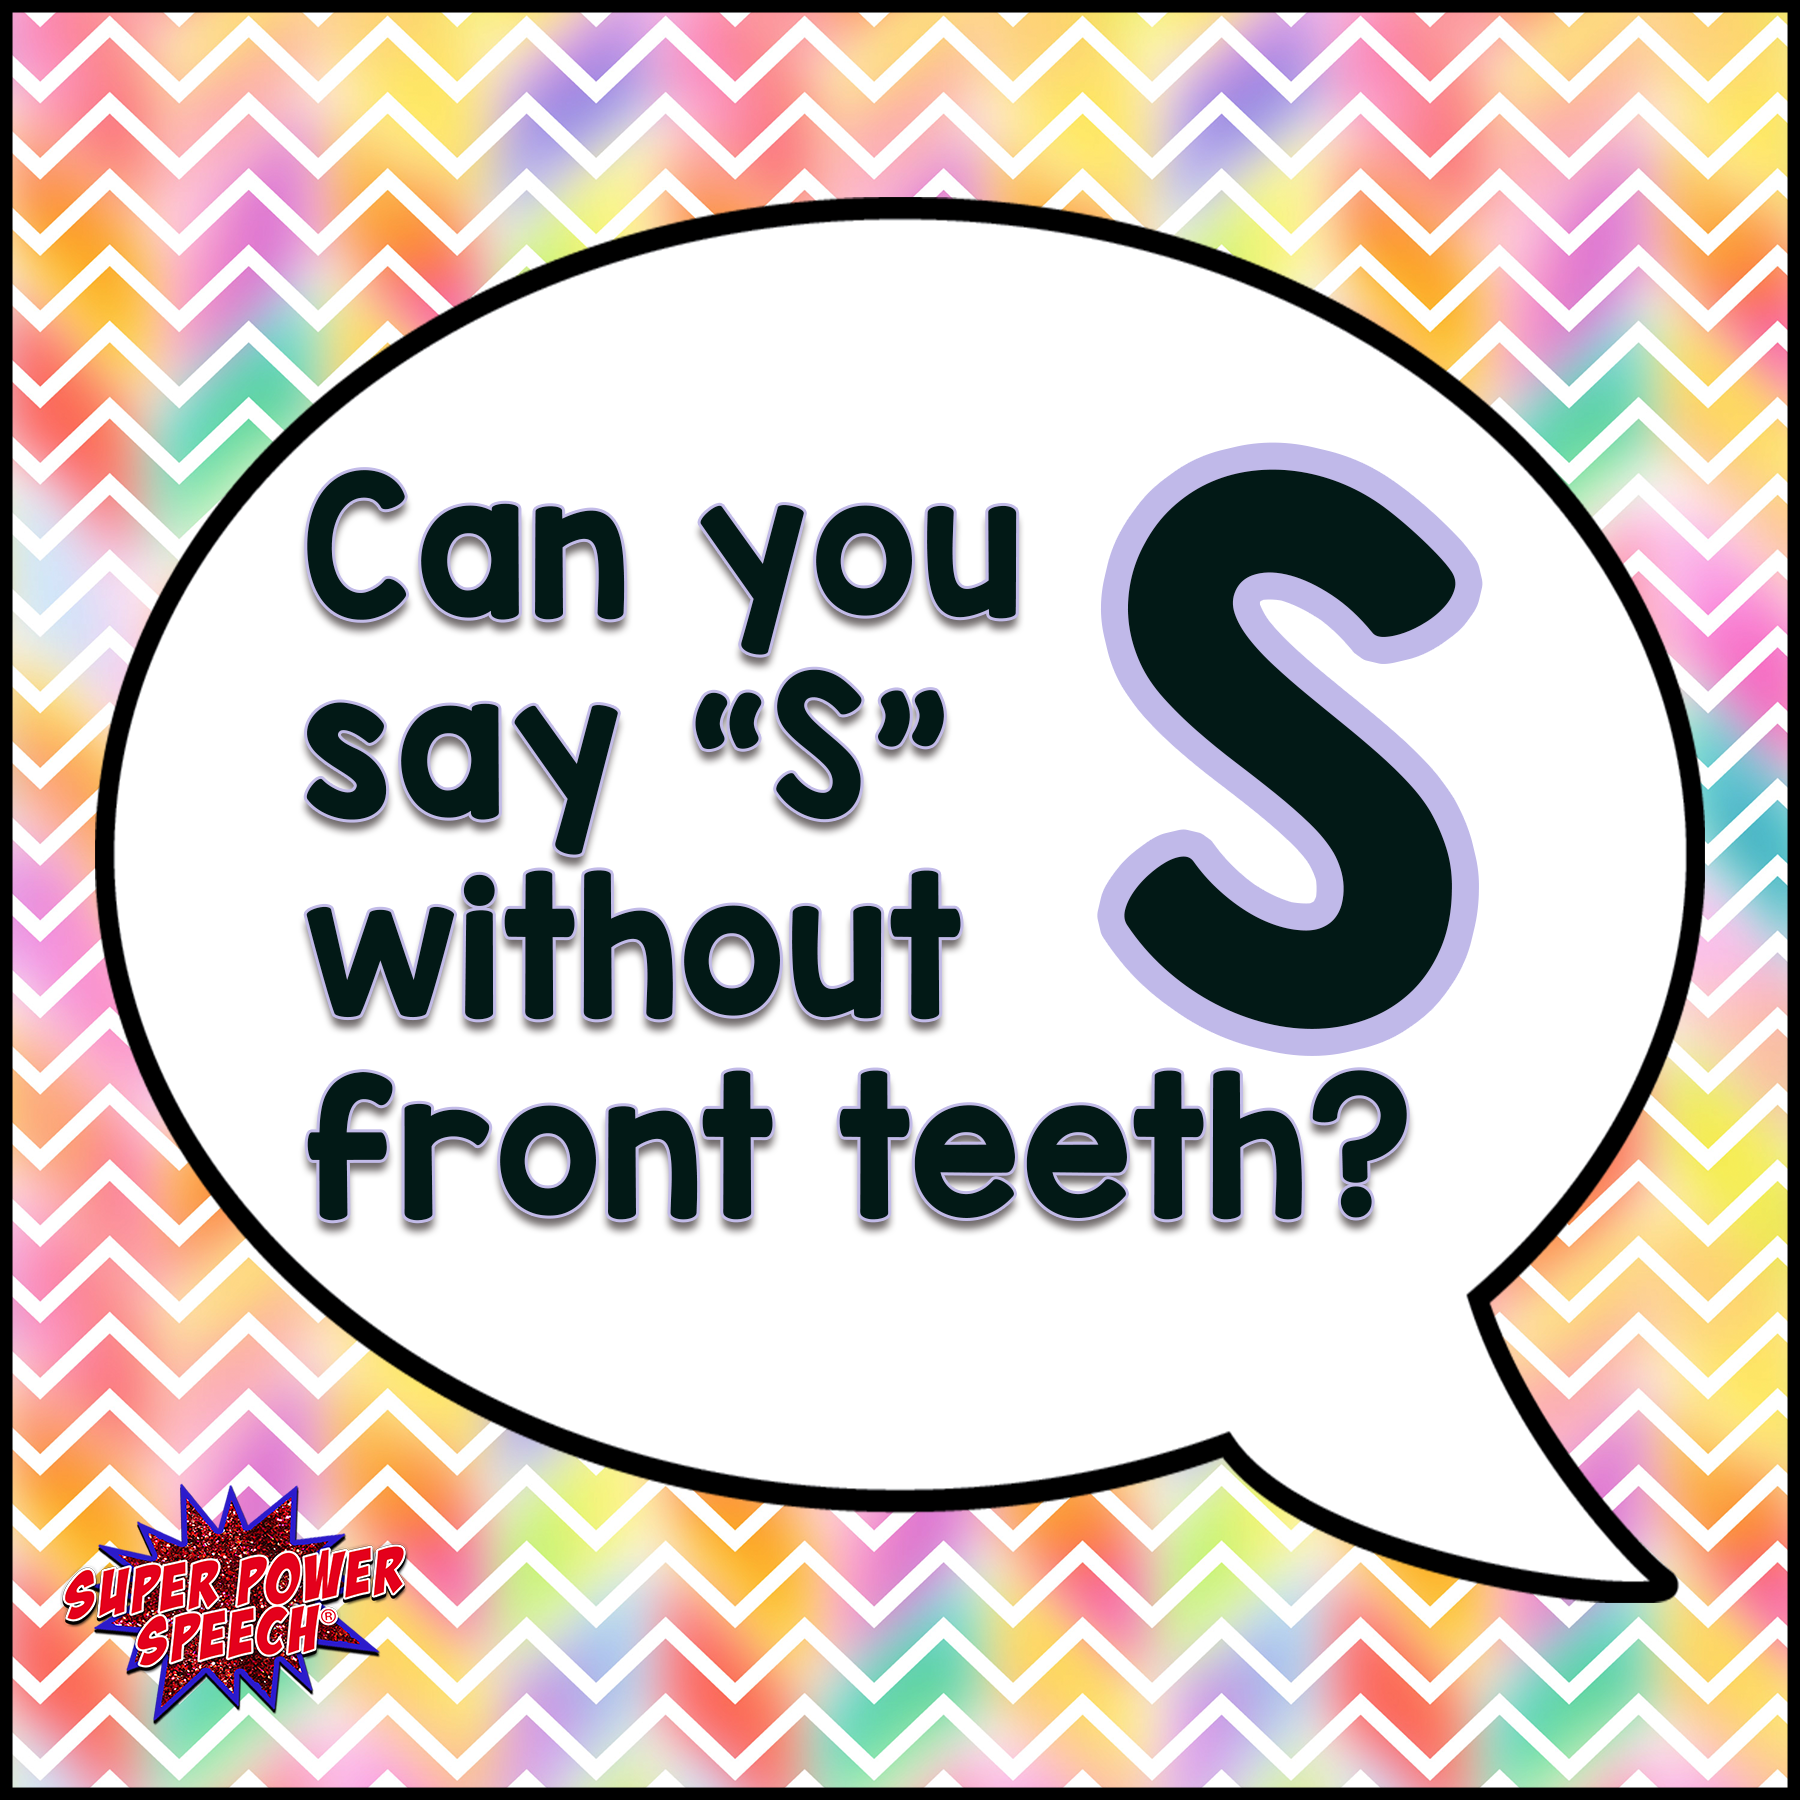 Can you say “S” without front teeth?